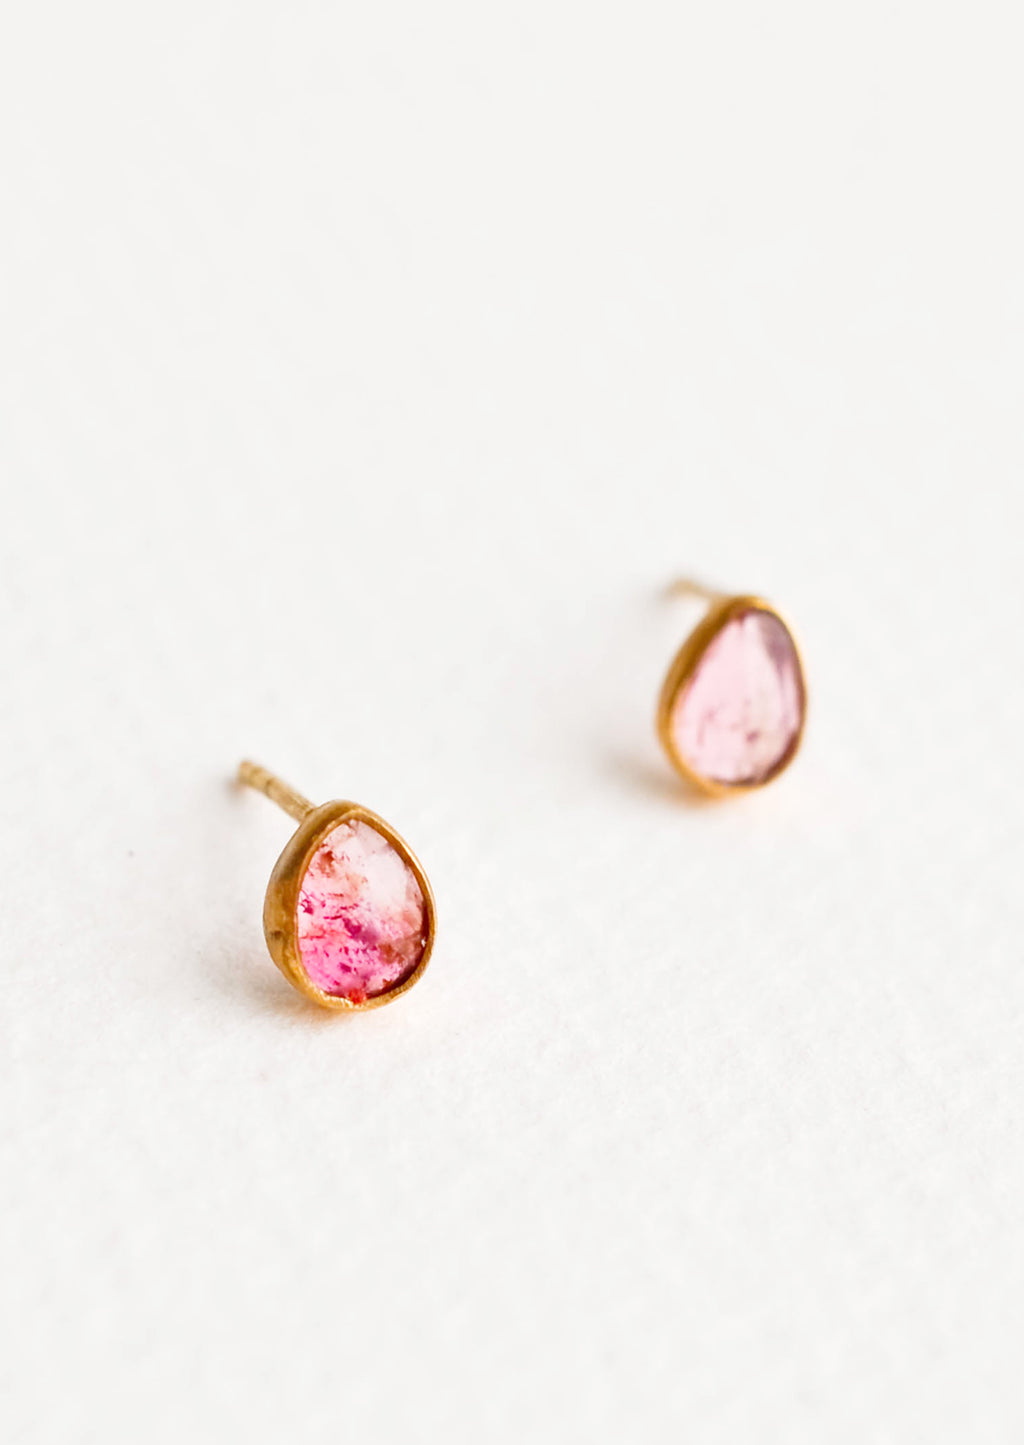 Pinks: Brass asymmetric stud earrings featuring a pink multicolored tourmaline stone.